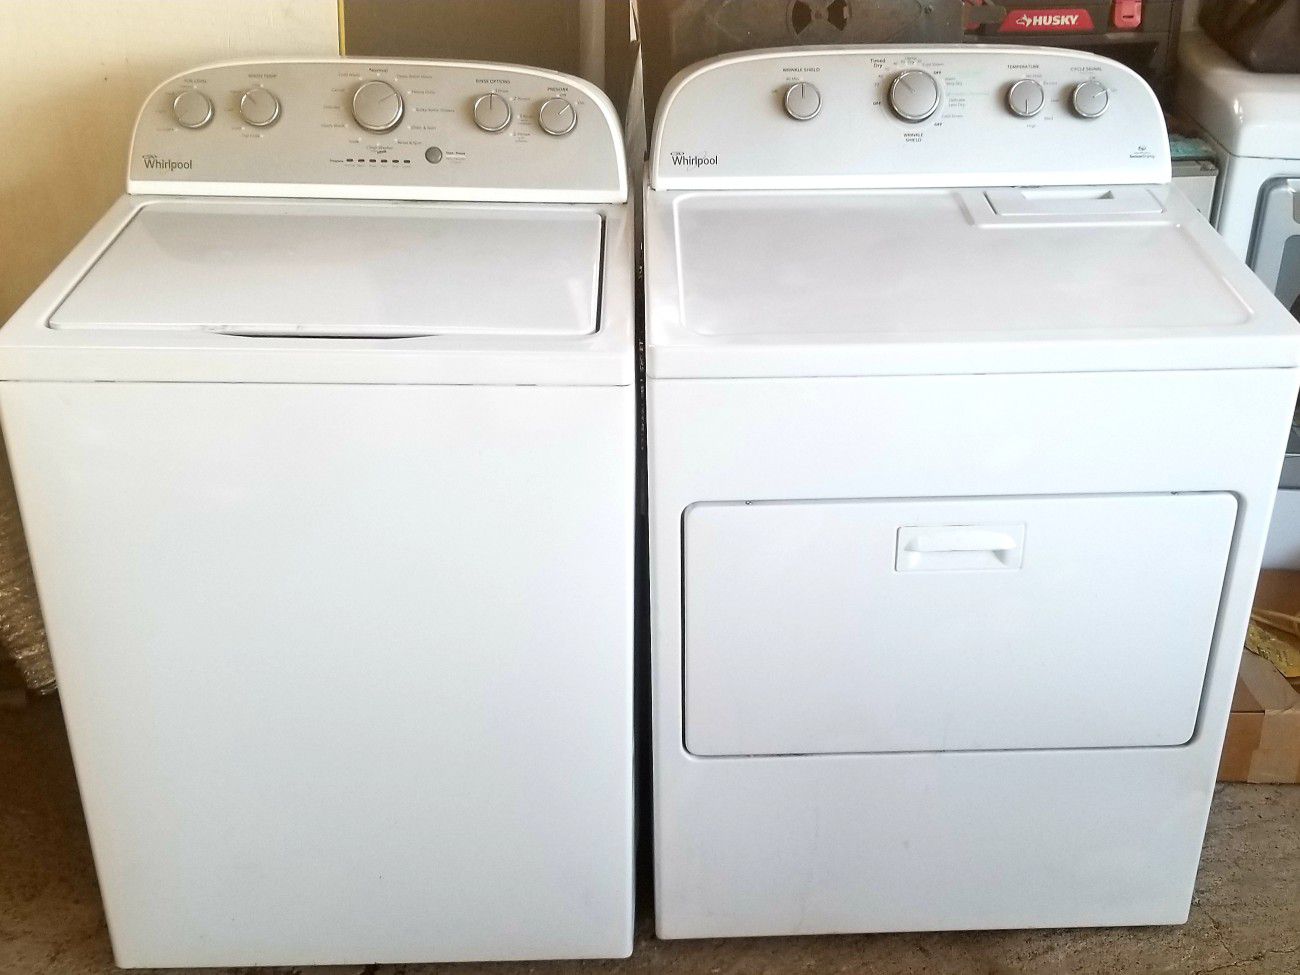 WhirlPool Stainless washer dryer set $395